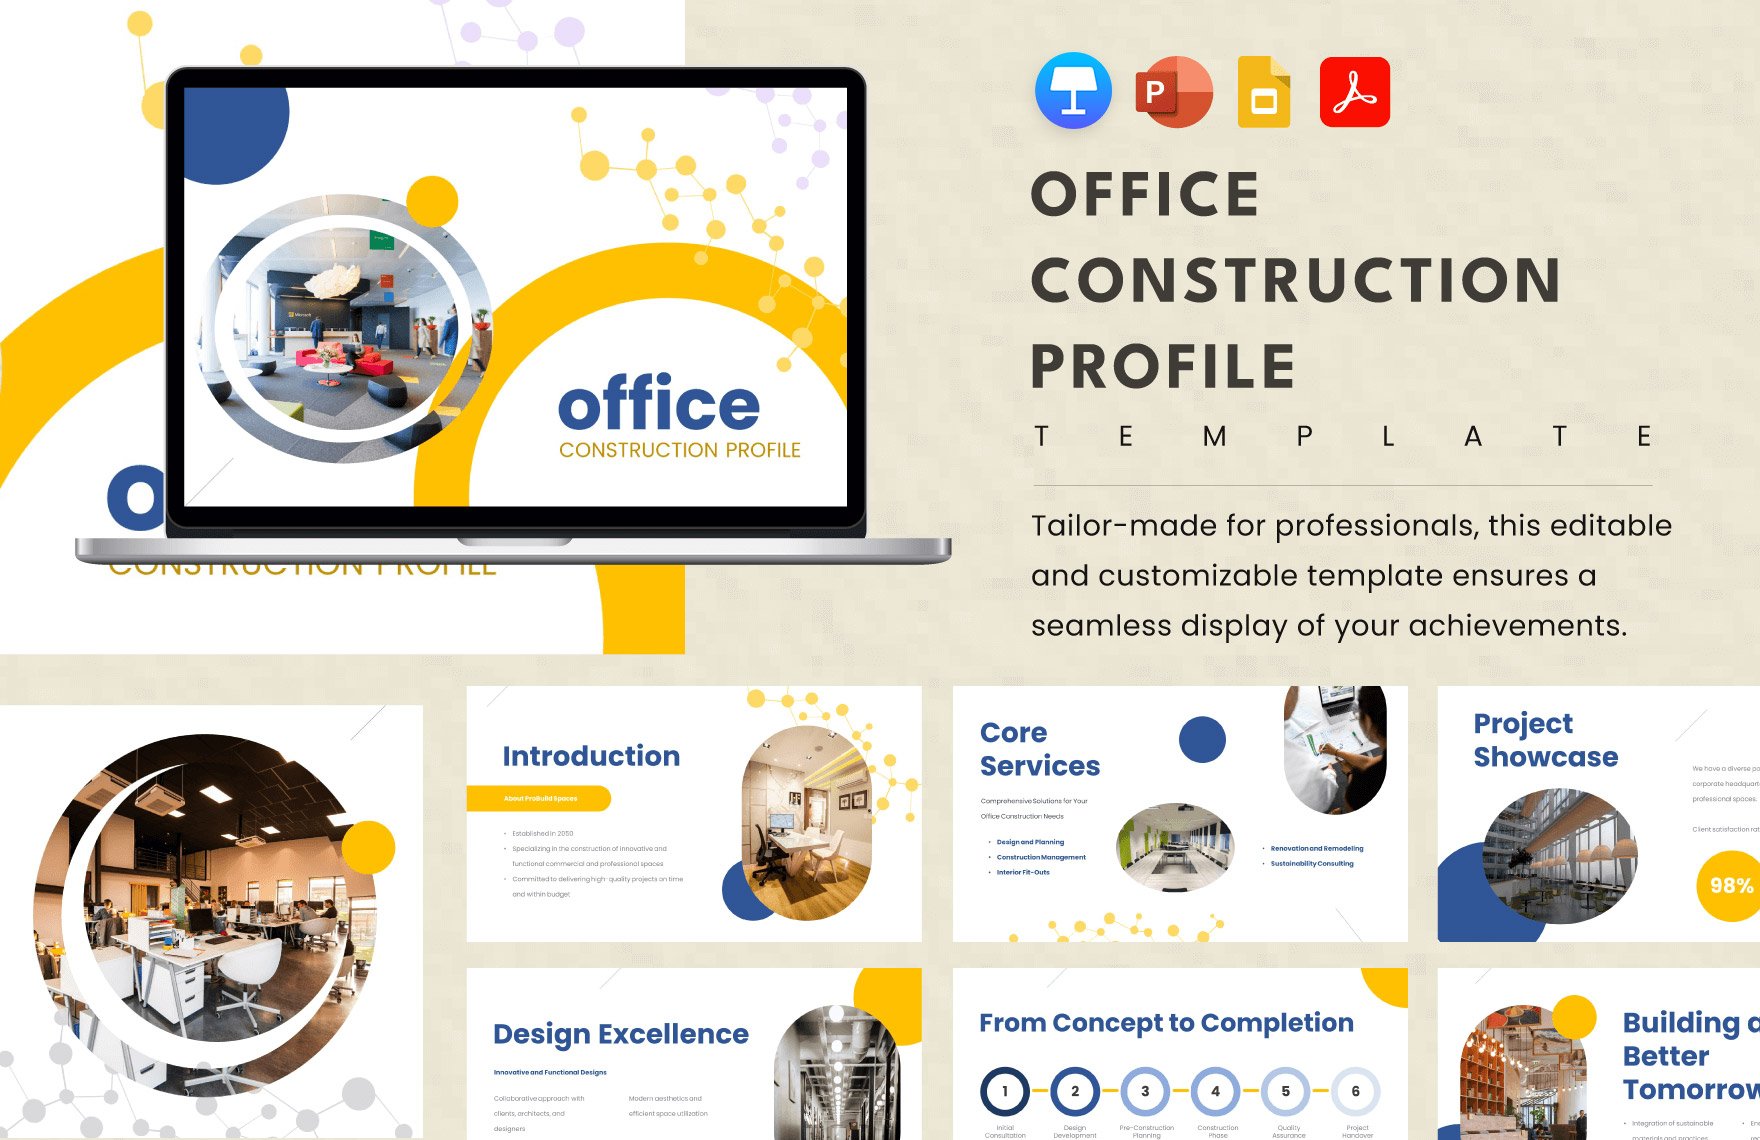 Office Construction Profile Template